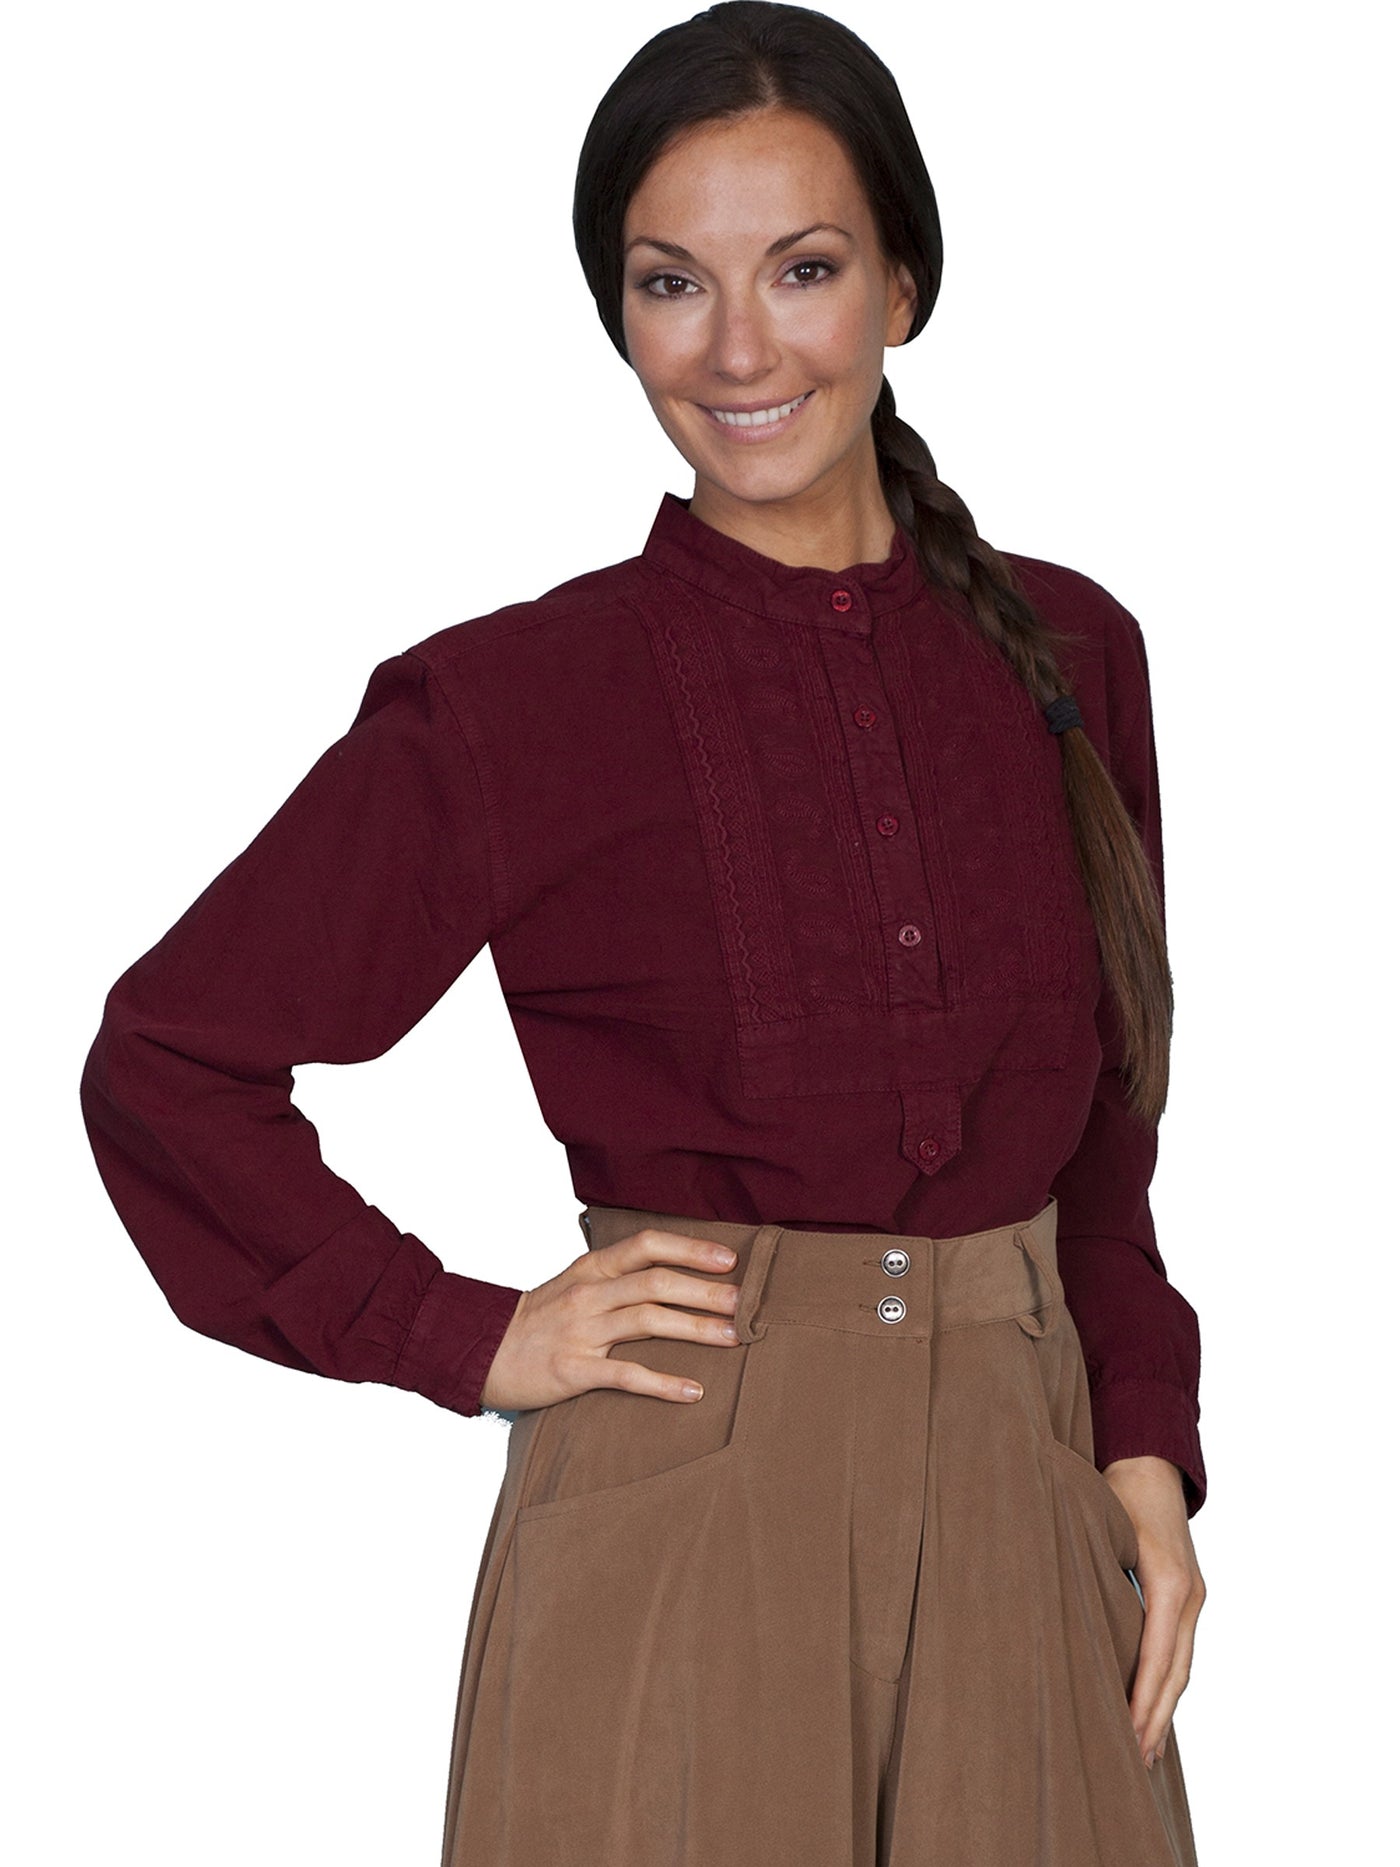 Victorian Style Blouse in Burgundy - SOLD OUT